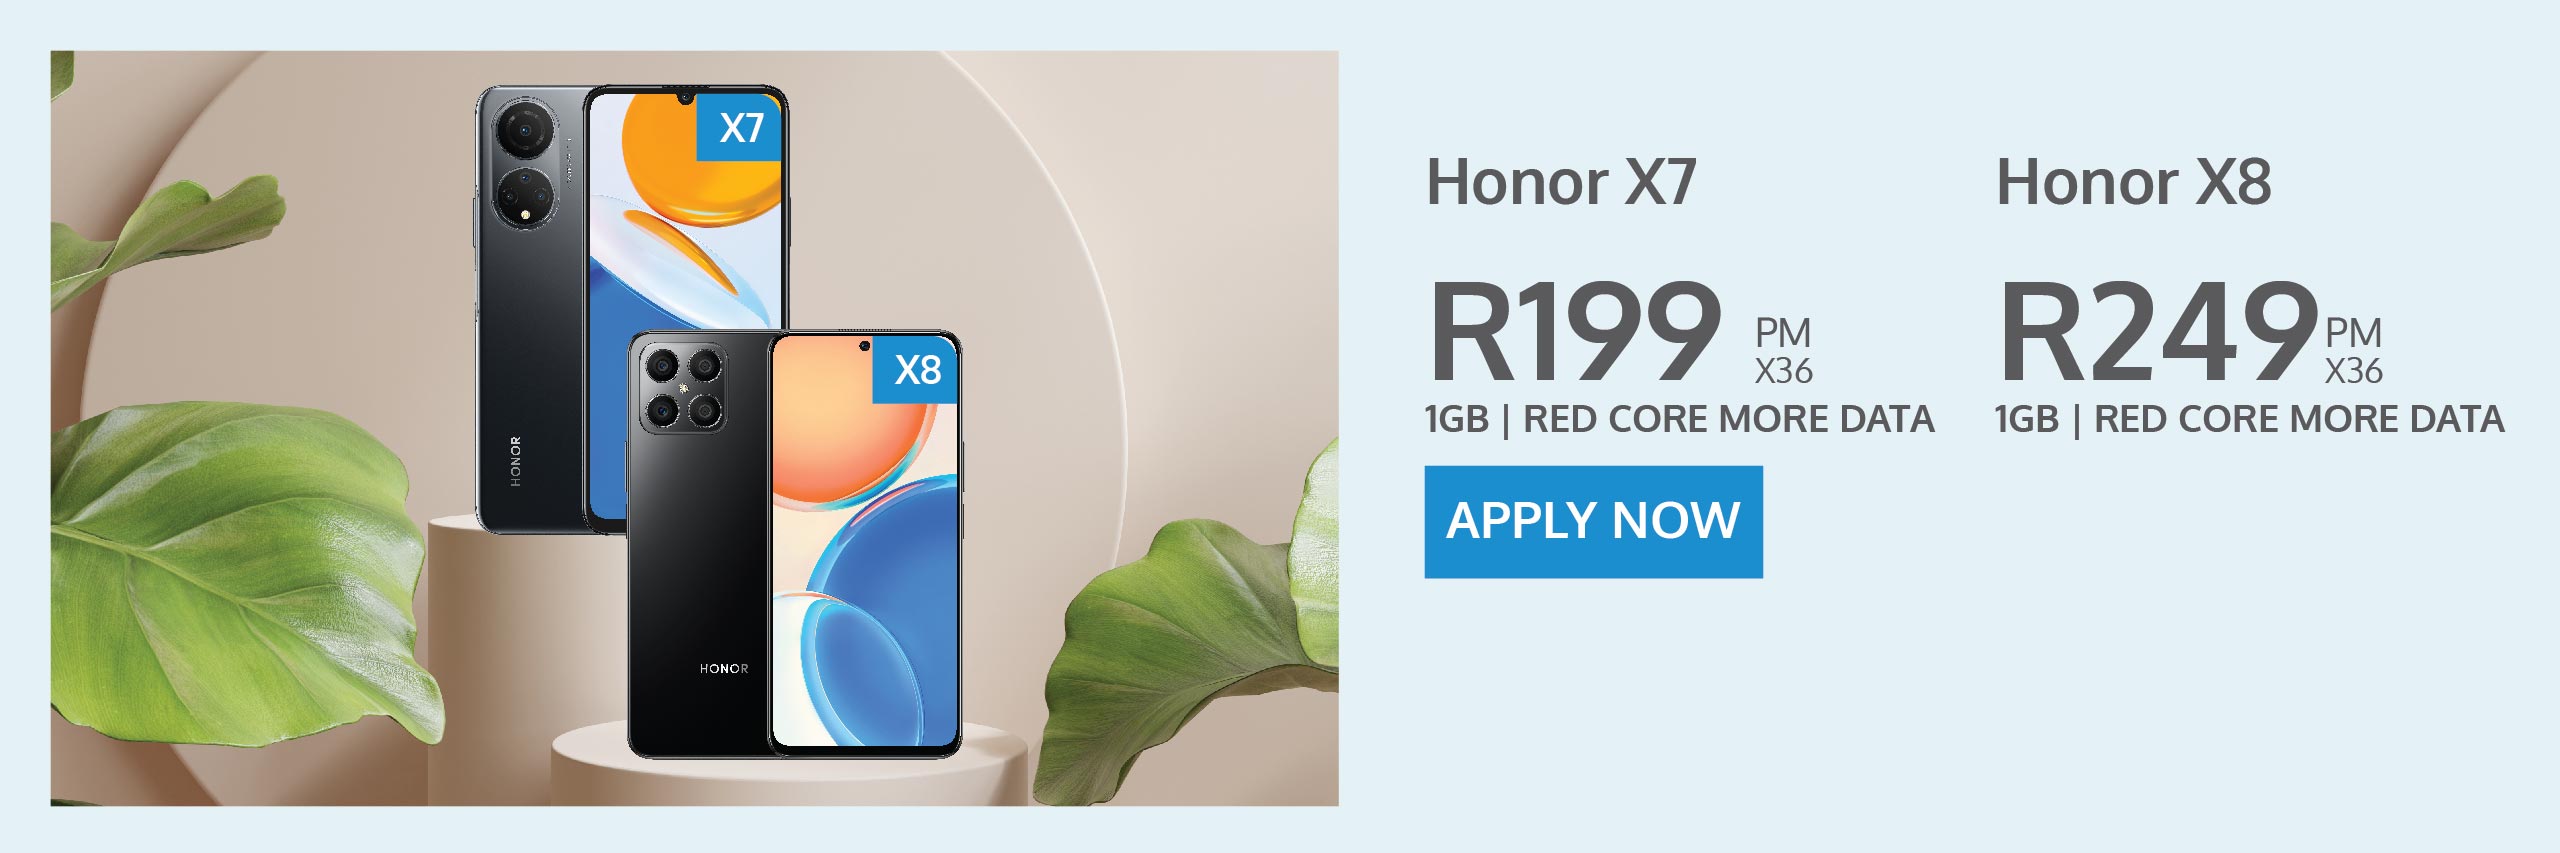 Honor X7 and X8 contract deals